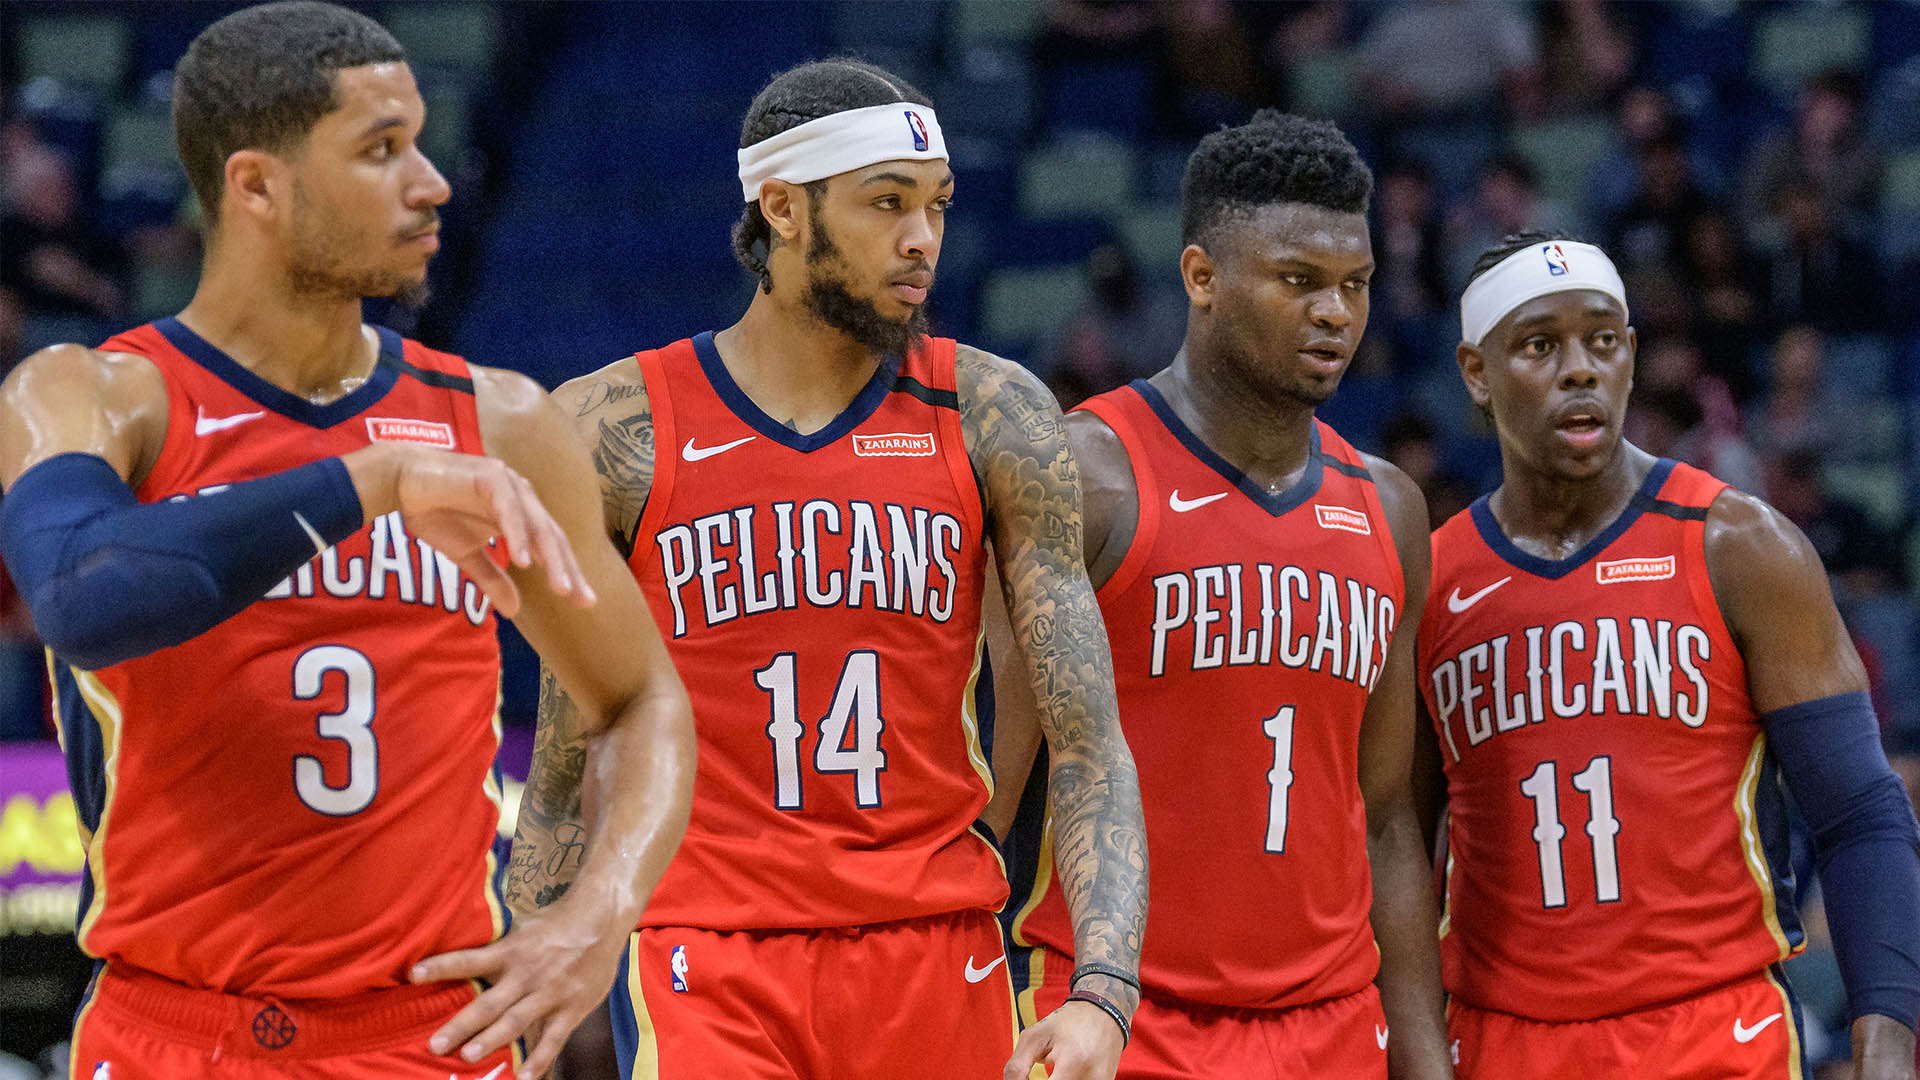 Easy schedule and a slimmed-down Zion Williamson: Are the Pelicans